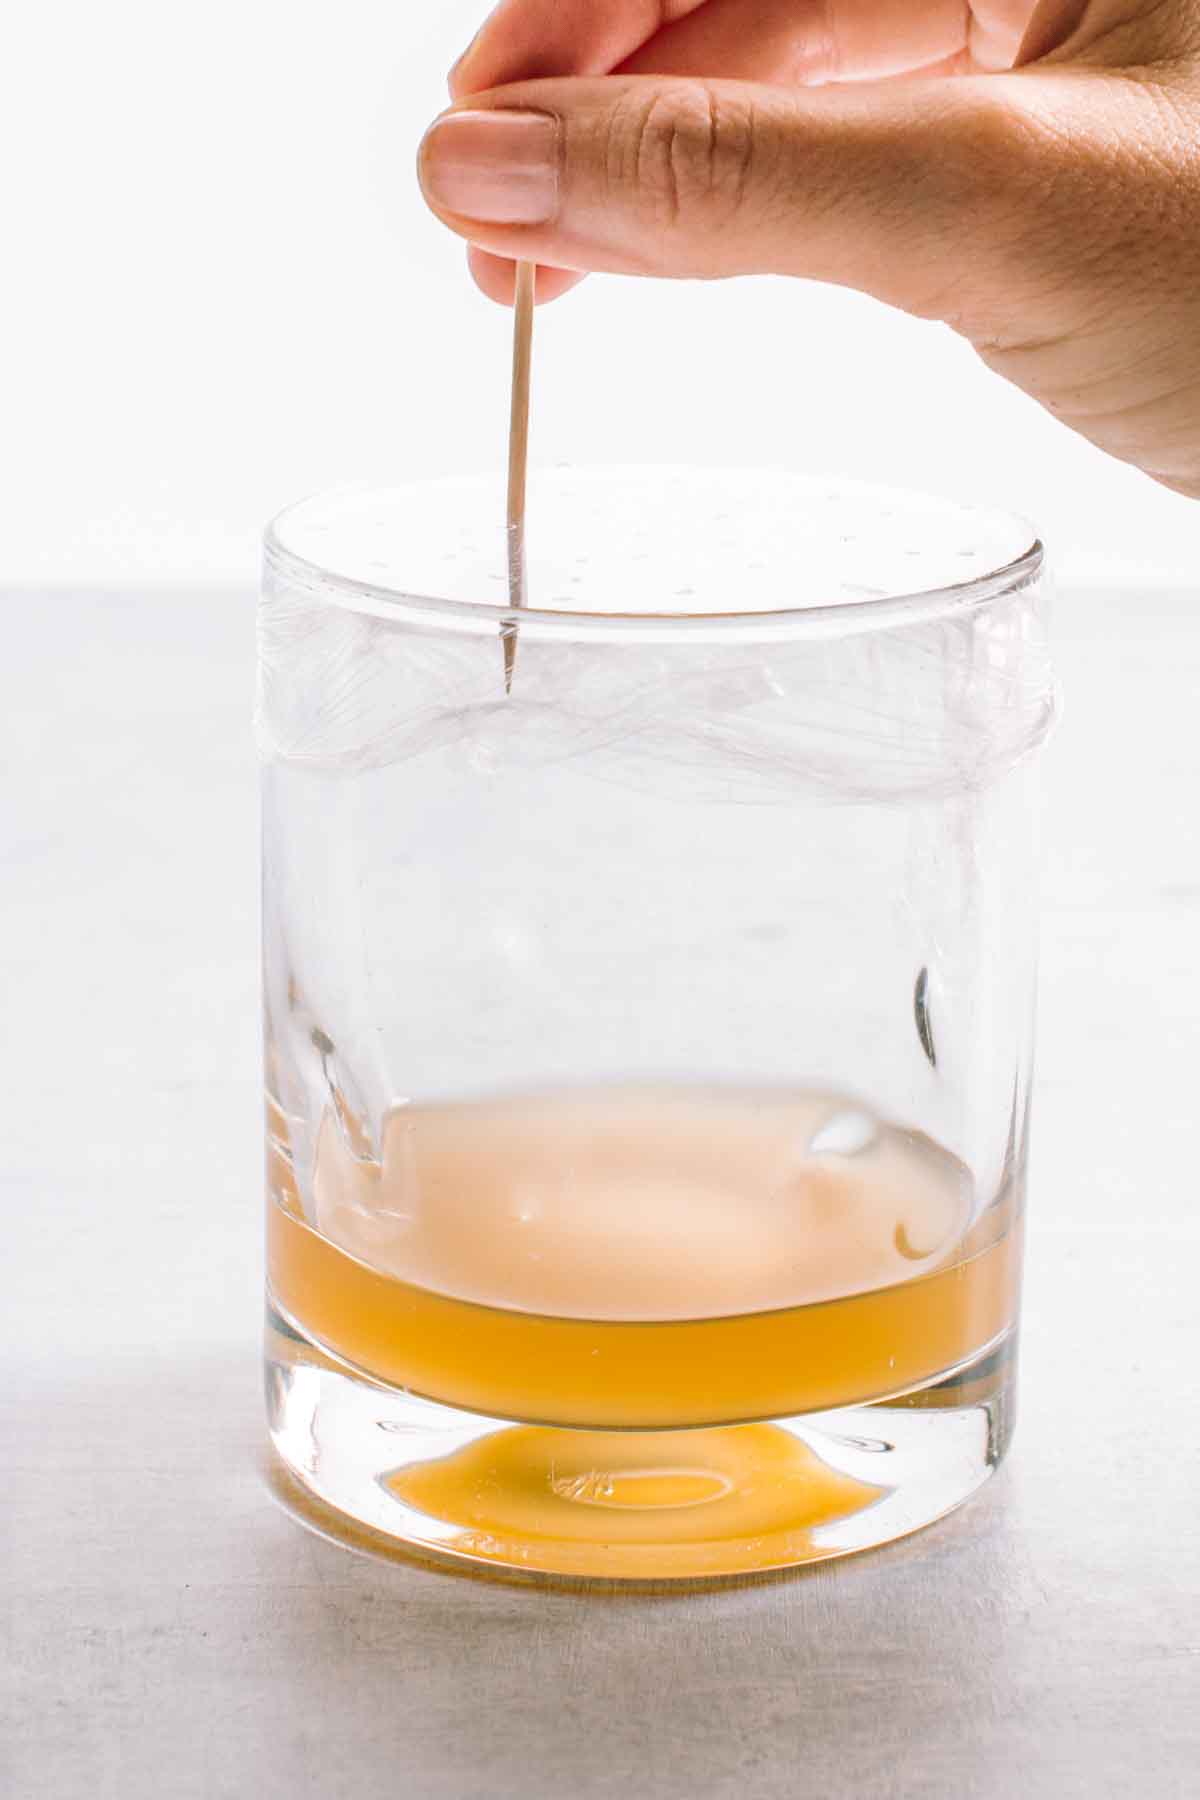 A toothpick poking holes in a glass filled with apple cider vinegar.